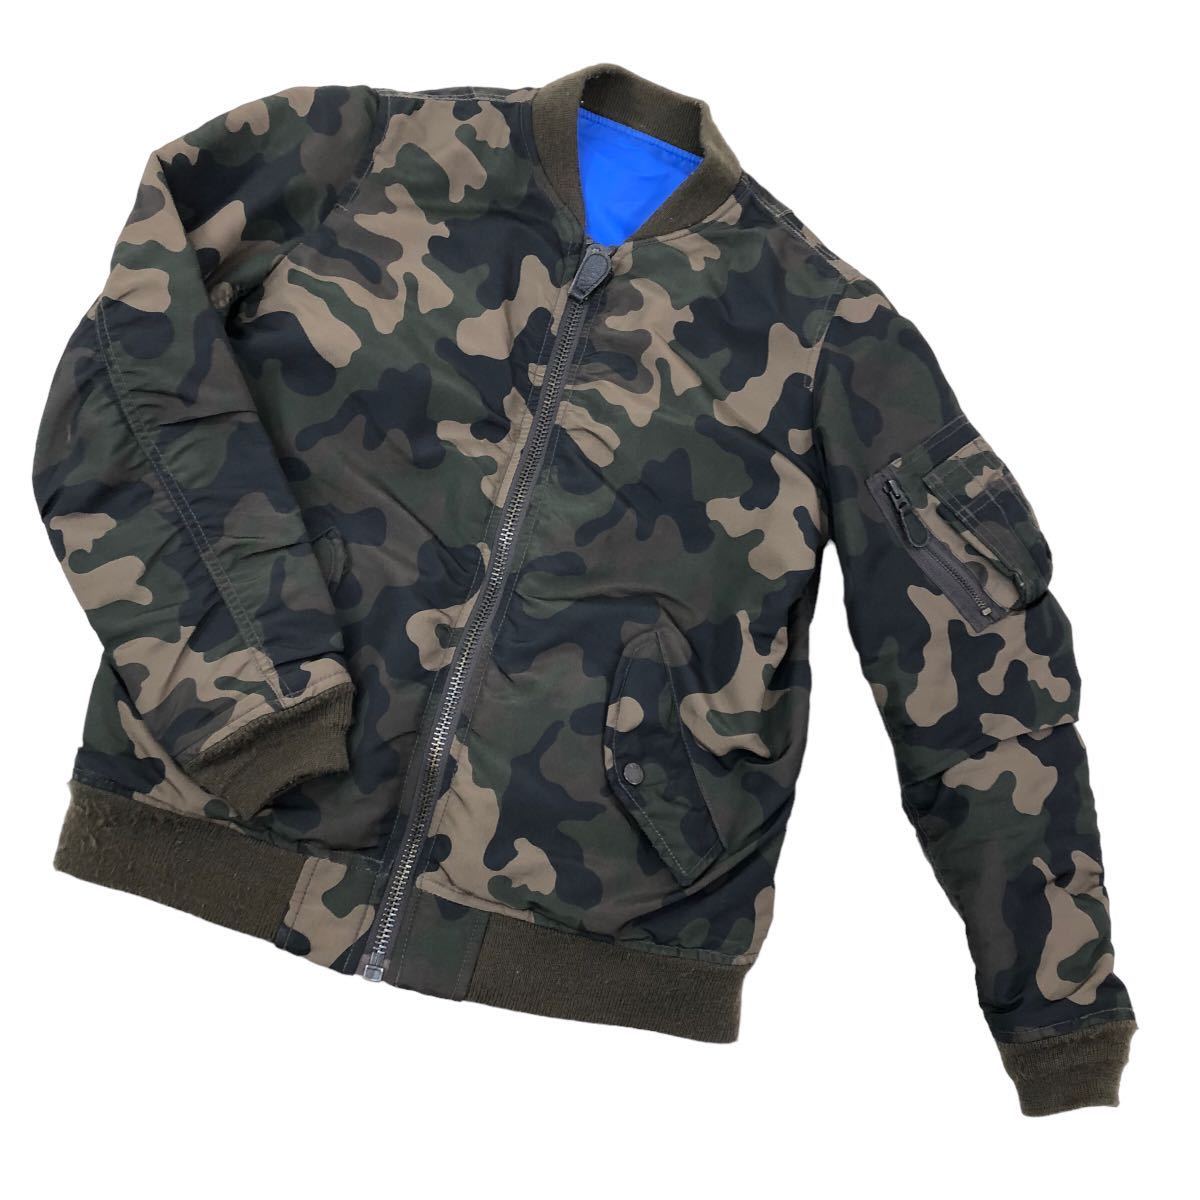 S159 AVIREX Avirex MA-1 reversible 2way jacket blouson outer jumper outer garment lady's M camouflage camouflage blue 